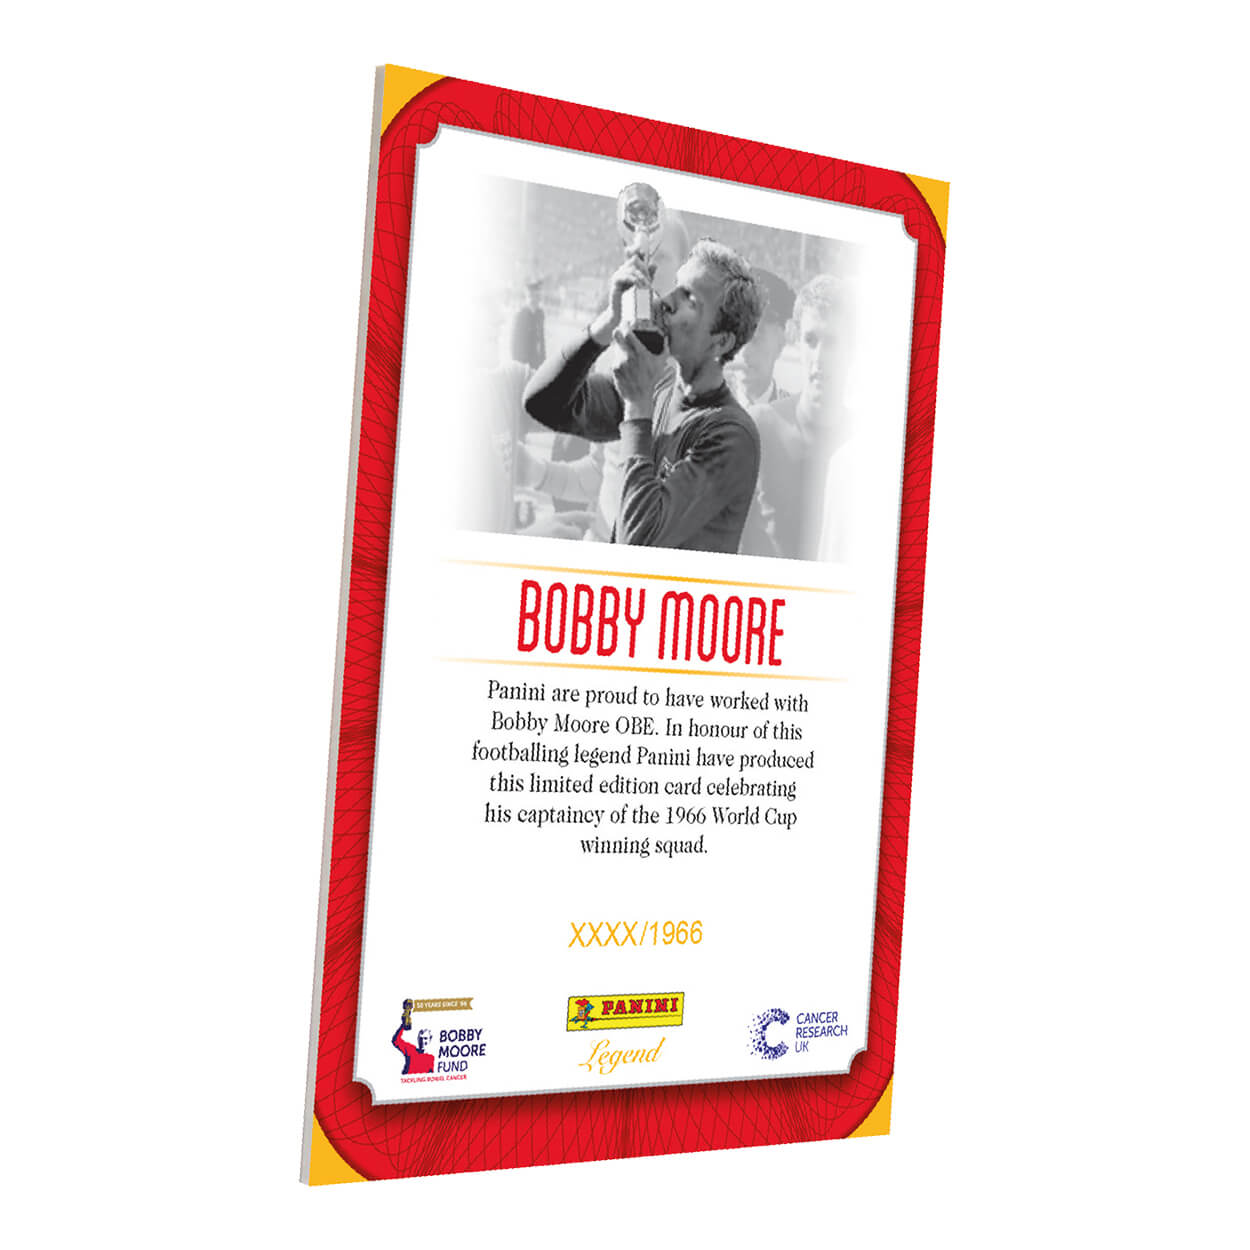 PaniniBobby Moore Limited Edition 1966 CardTrading CardsEarthlets